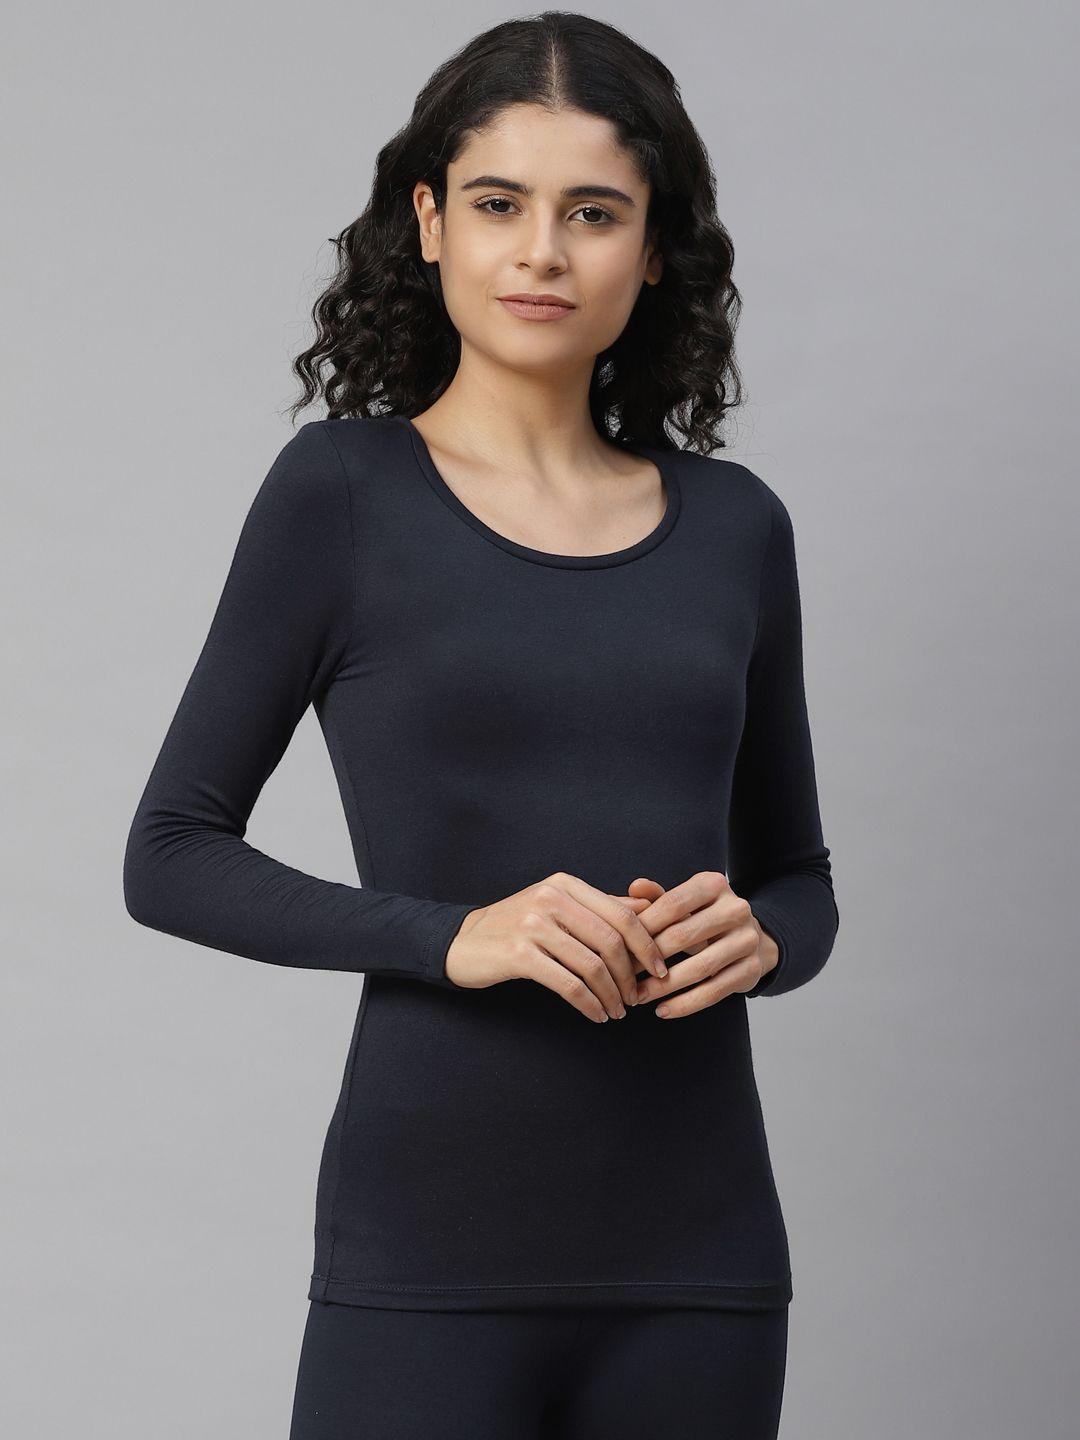 marks-&-spencer-women-navy-blue-solid-thermal-top